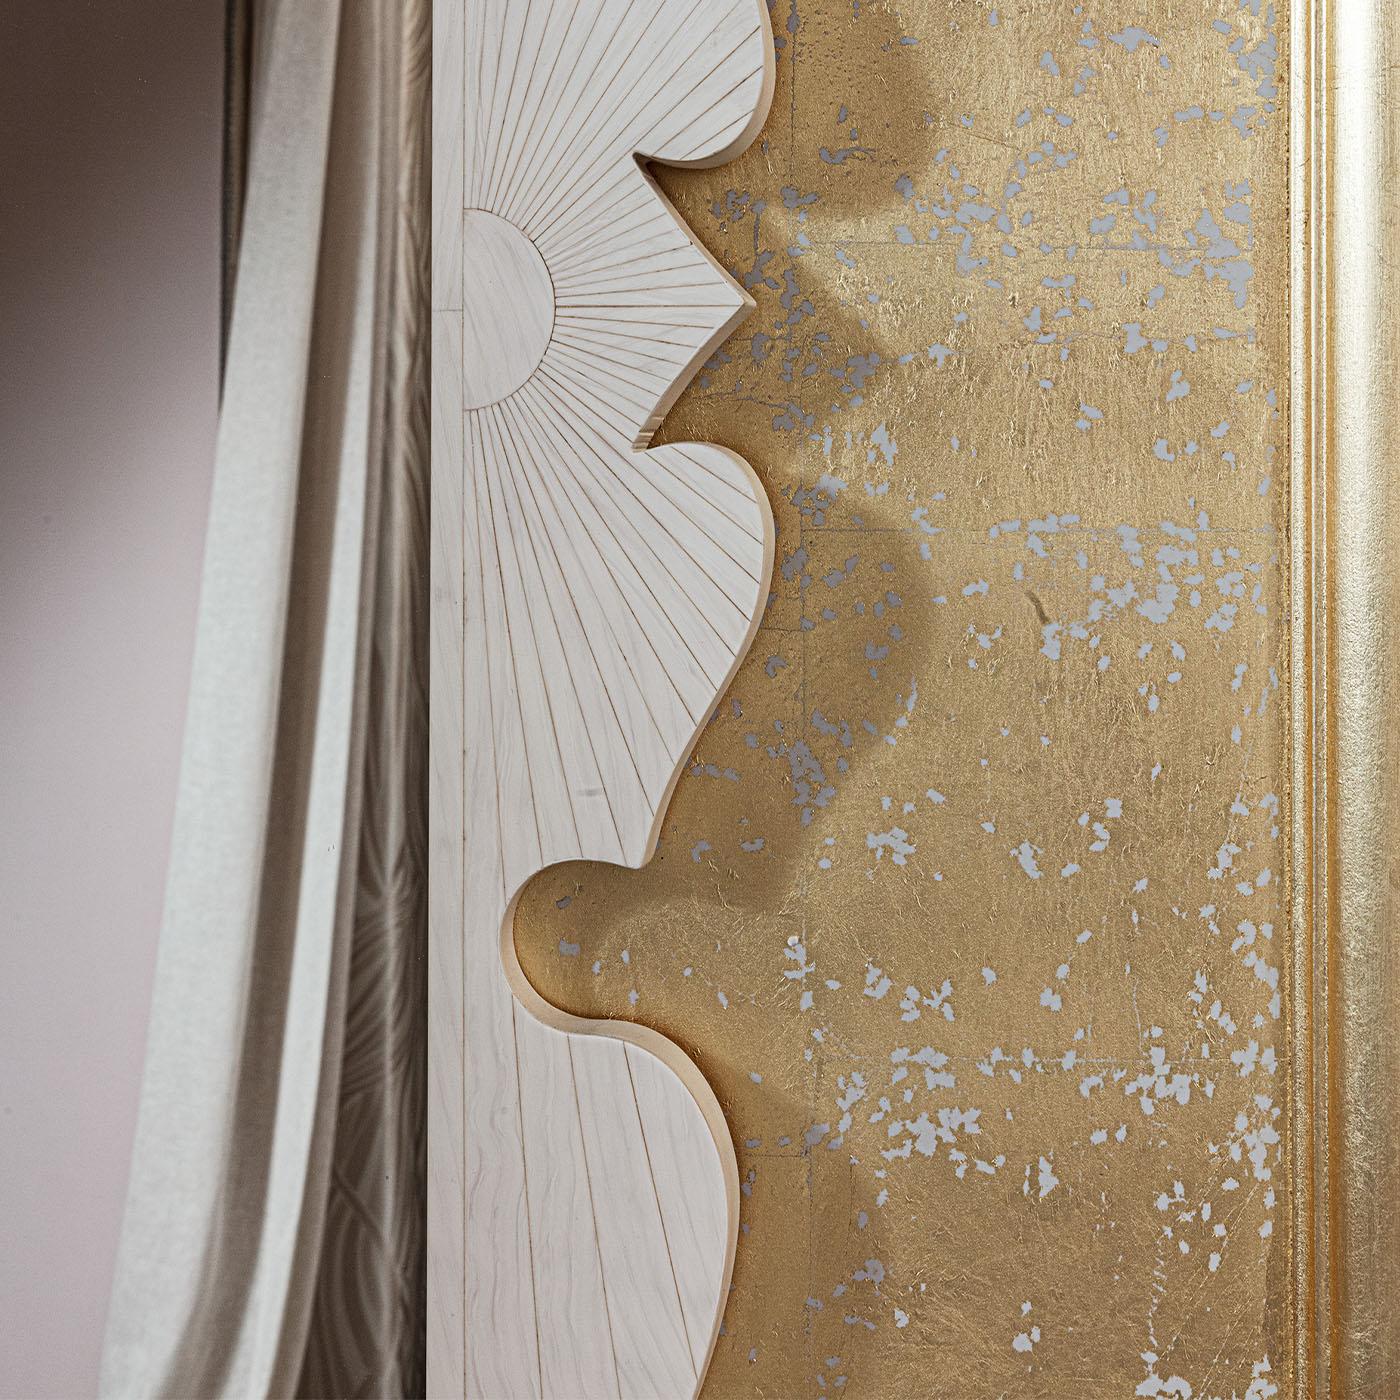 This handcrafted eco-ivory inlaid mirror is framed with exquisite gold leaf detailing.